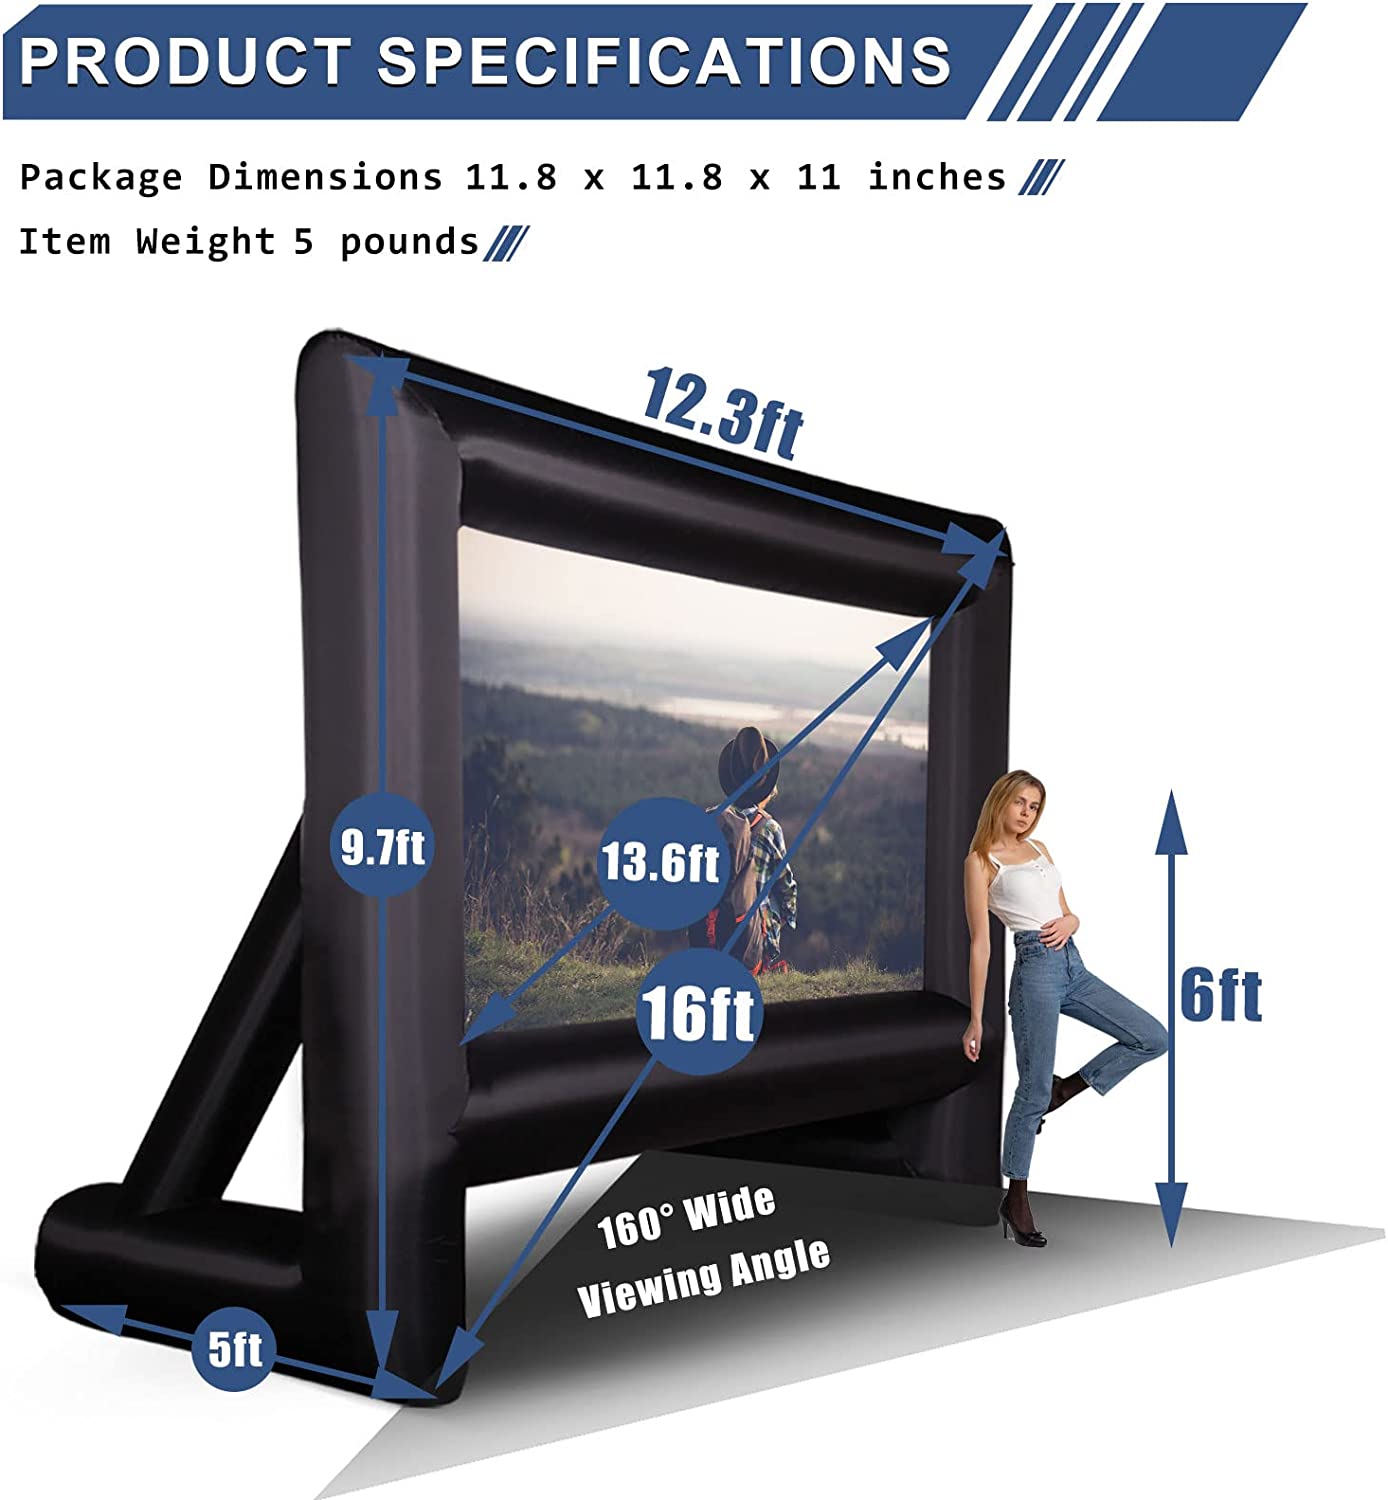 An inflatable giant movie screen showing its product specifications. Item weight is 5 pounds. Package dimensions are 11.8 x 11.8 x 11 inches.